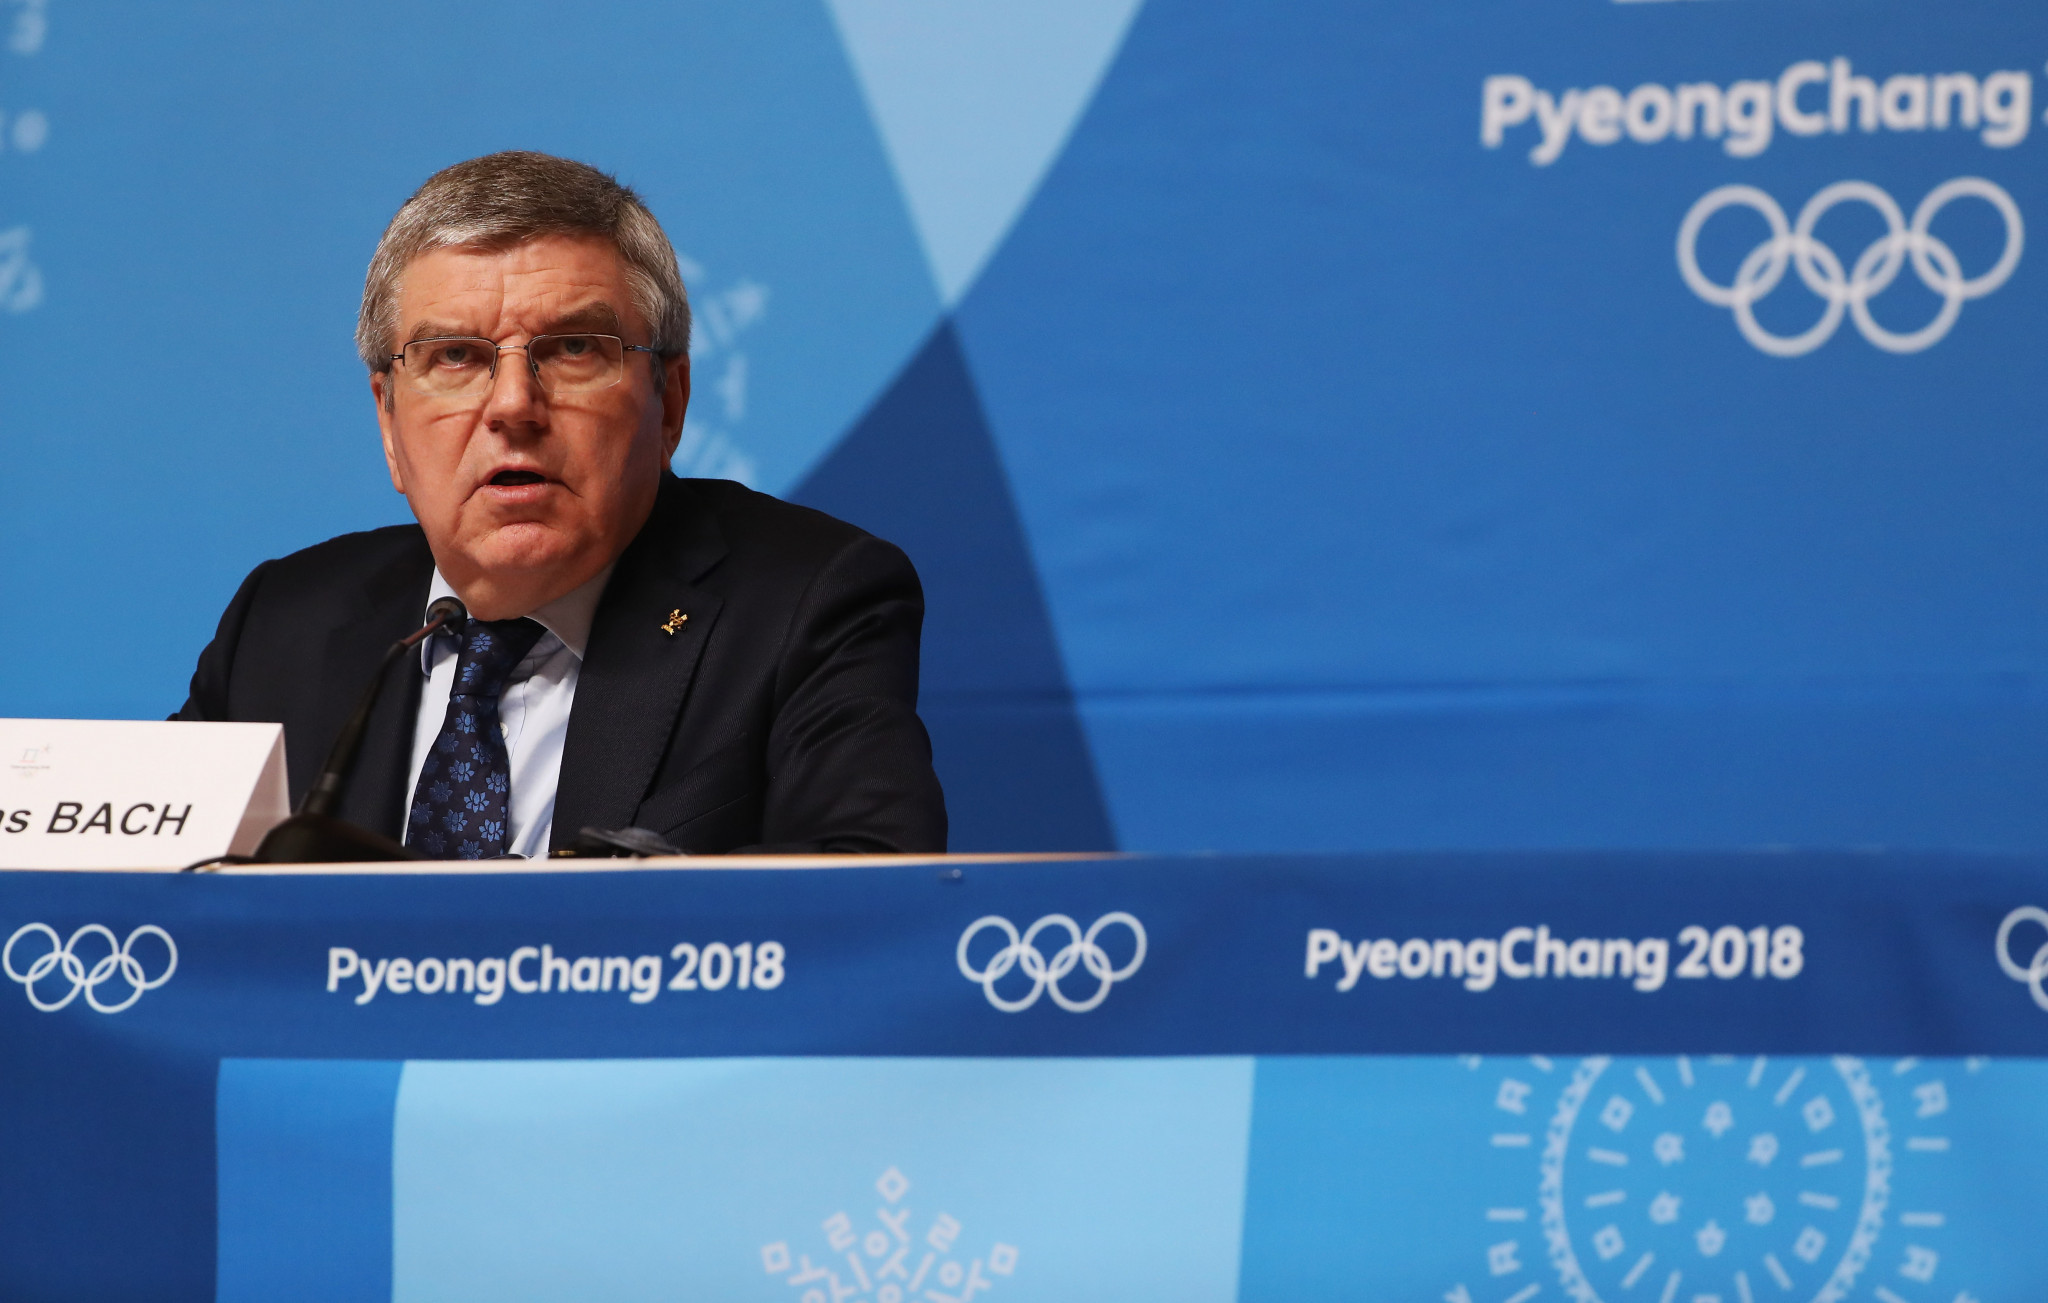 Thomas Bach also addressed the role that IFs must play in continuing cases against Russia ©Getty Images